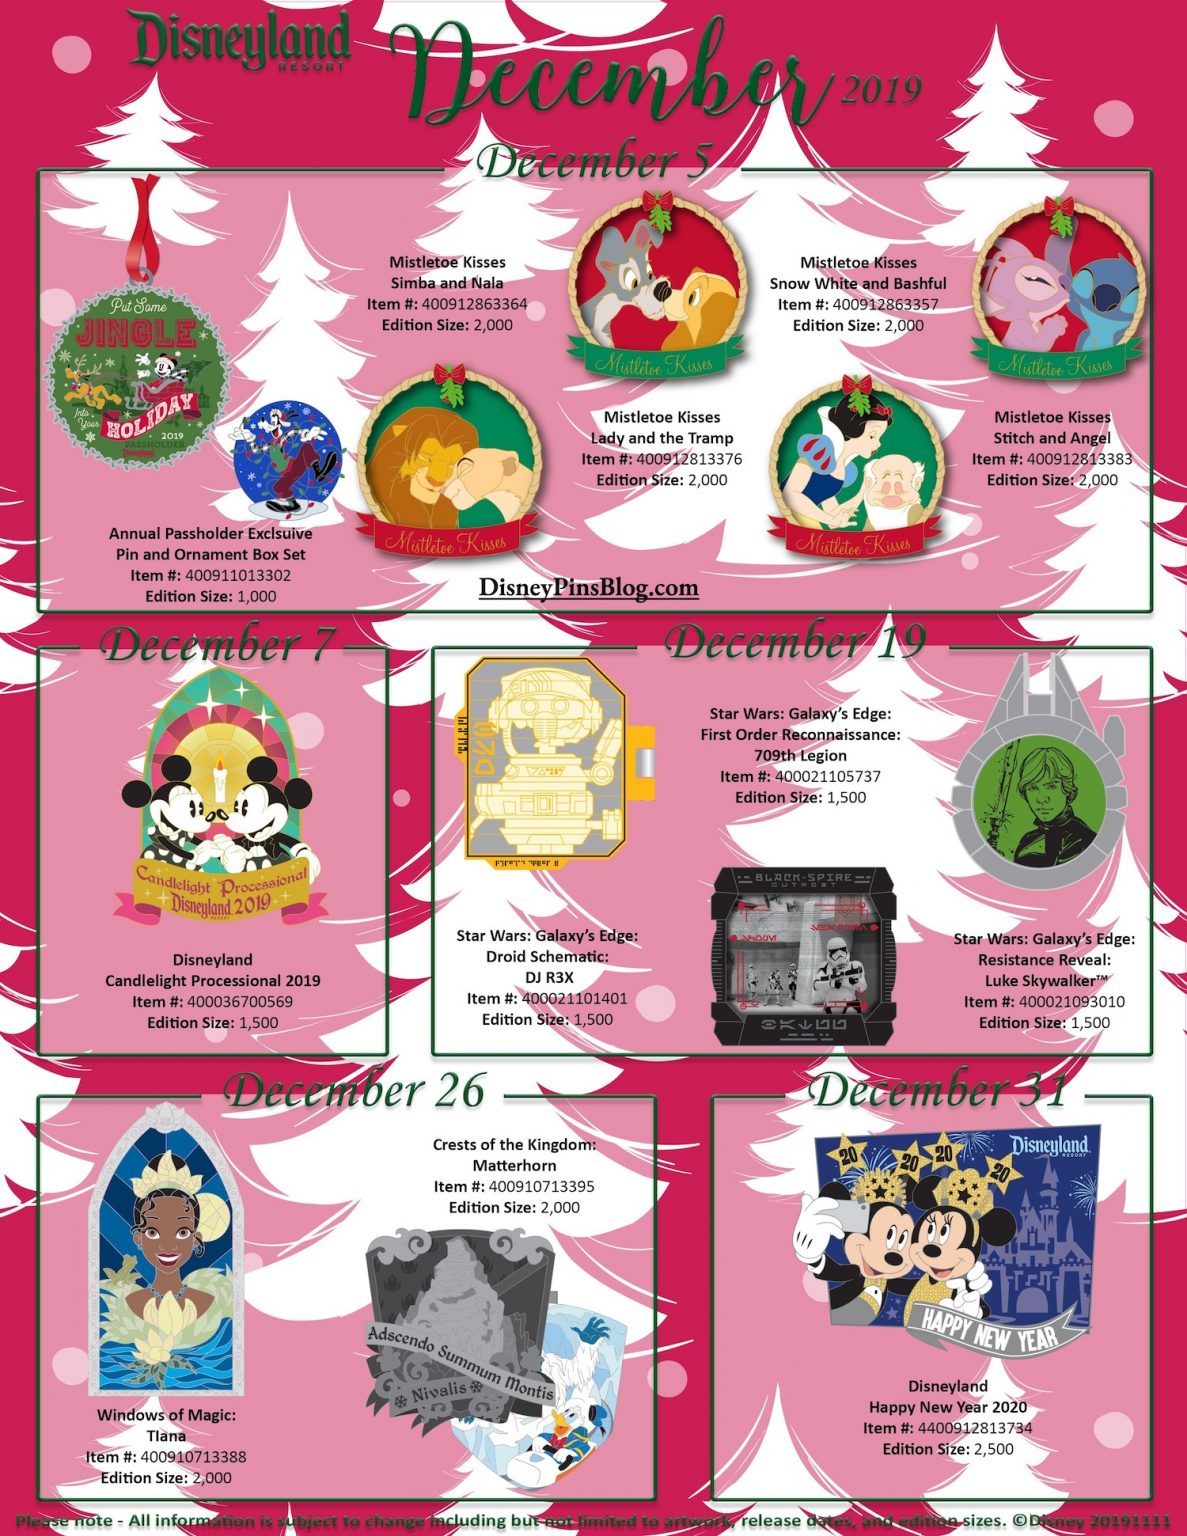 December 2019 Pin Releases Walt Disney World and Disneyland Feature Star Tours 30th Anniversary, Princess and The Frog 10th Anniversary, Matterhorn, Disney's Riviera Resort Pins, and More - WDW News Today